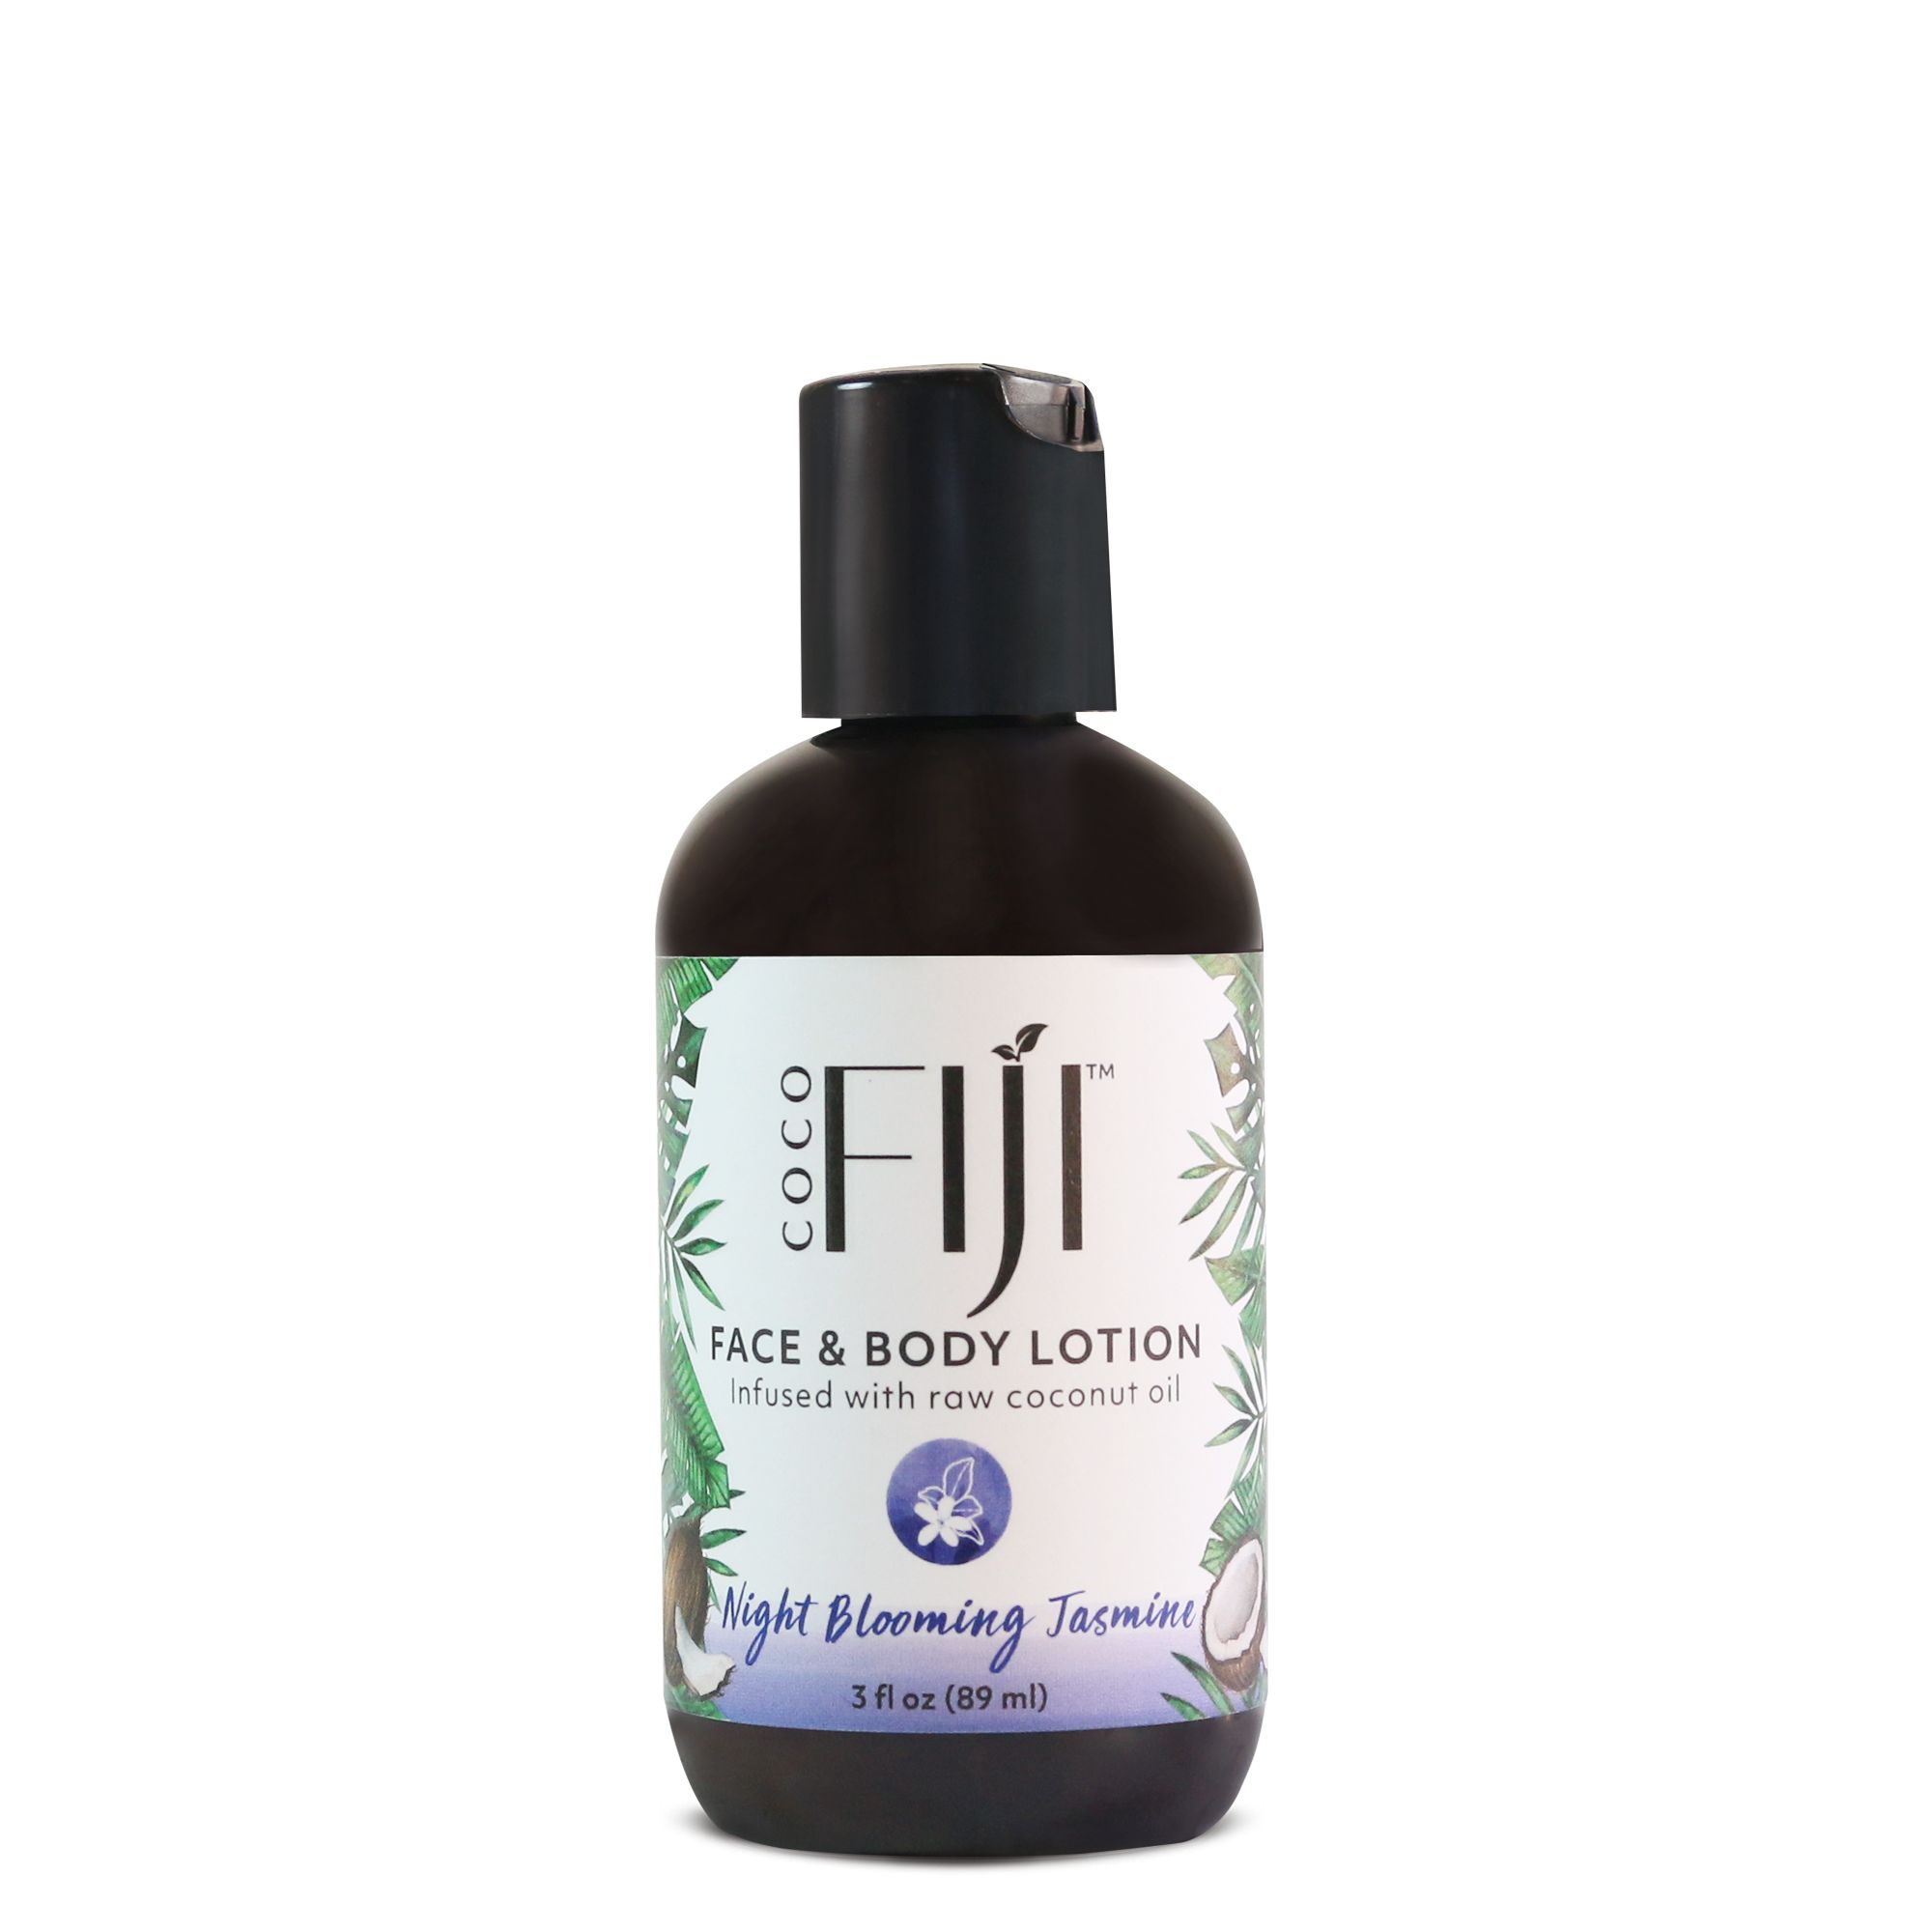 Picture of Coco Fiji 833884001180 3 oz Infused Face & Body Lotion with Raw Coconut Oil&#44; Night Blooming Jasmine